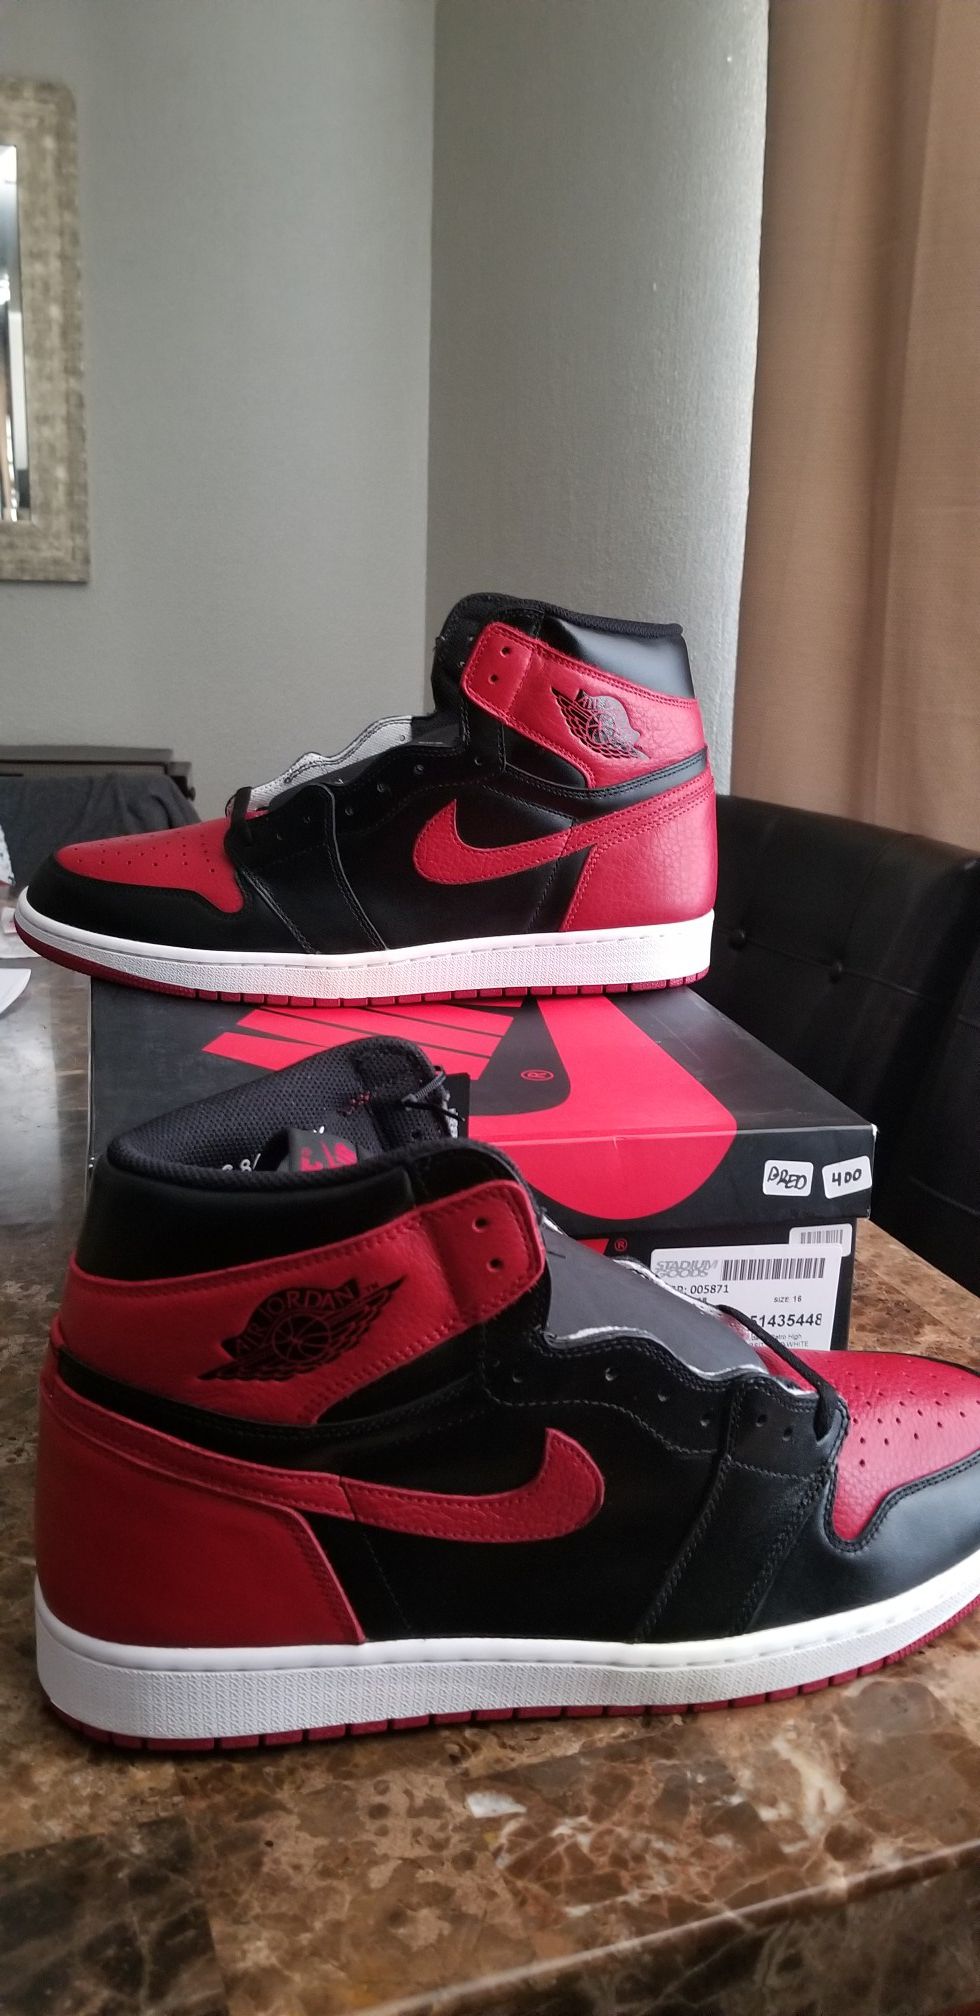 Air jordan 1 Retro Bred/ Banned. (2016) size 16. Brand new with tags and box. Serious inquiries only. Dead stock. Please read the entire post .